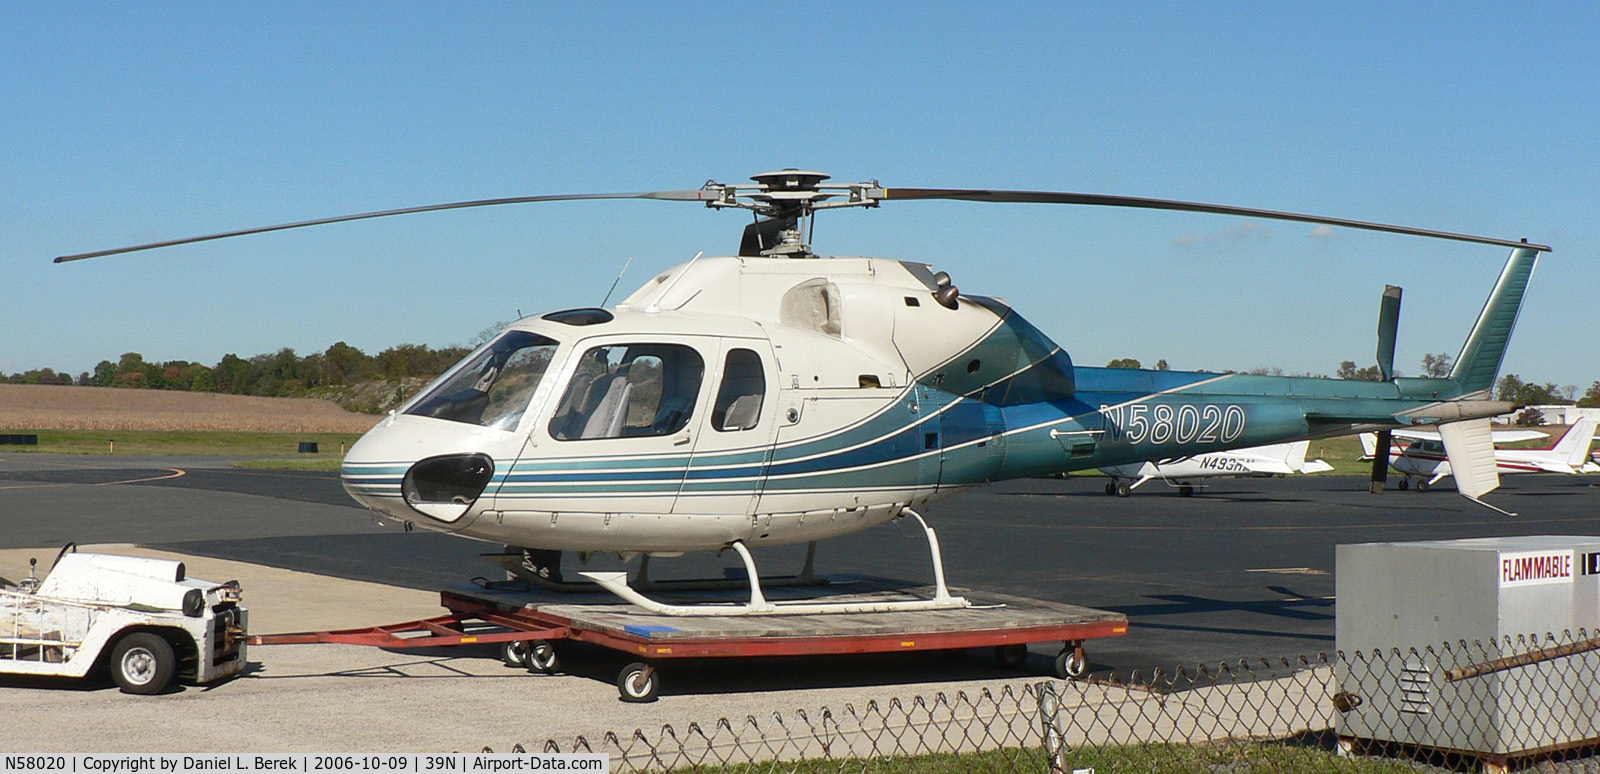 N58020, Aerospatiale AS-355F-1 Ecureuil 2 C/N 5227, Princeton whirlybird prepares for another journey.